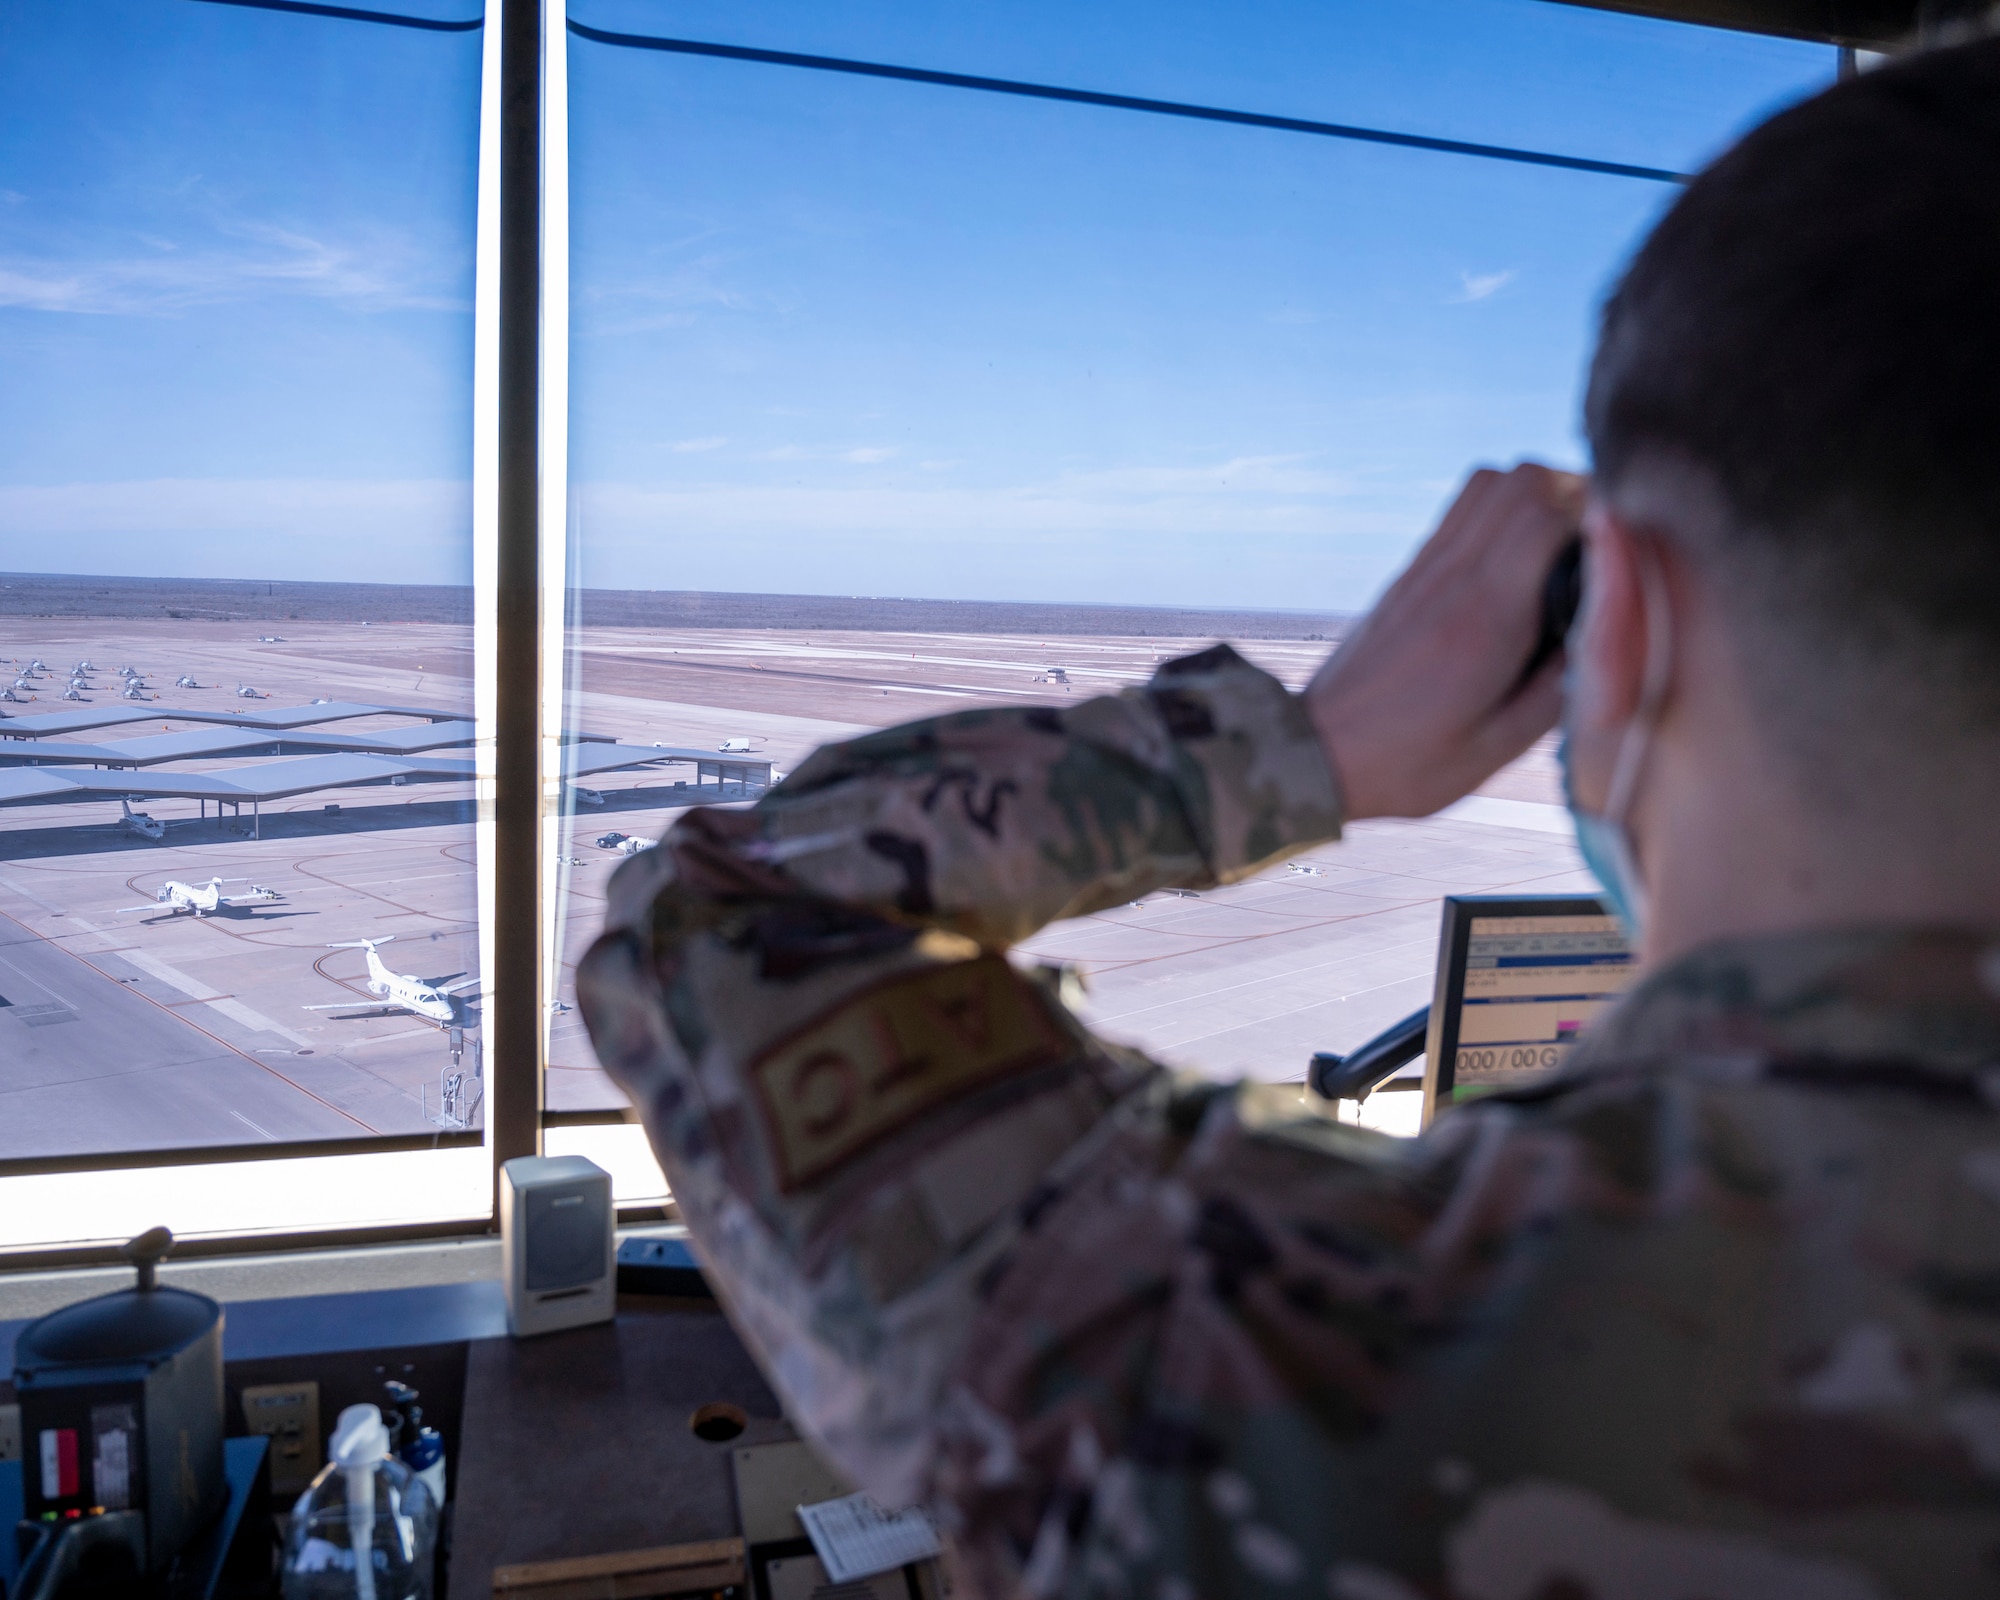 Senior Airman Gabriel Gilley watches from the Air Traffic Control Tower on January 18, 2022 as a T-38 approaches the runway at Laughlin Air Force Base, Texas. Air Traffic Controllers play a critical part in the mission of getting pilots airborne and keeping them safe in the skies. (U.S. Air Force photo by Senior Airman Nicholas Larsen)